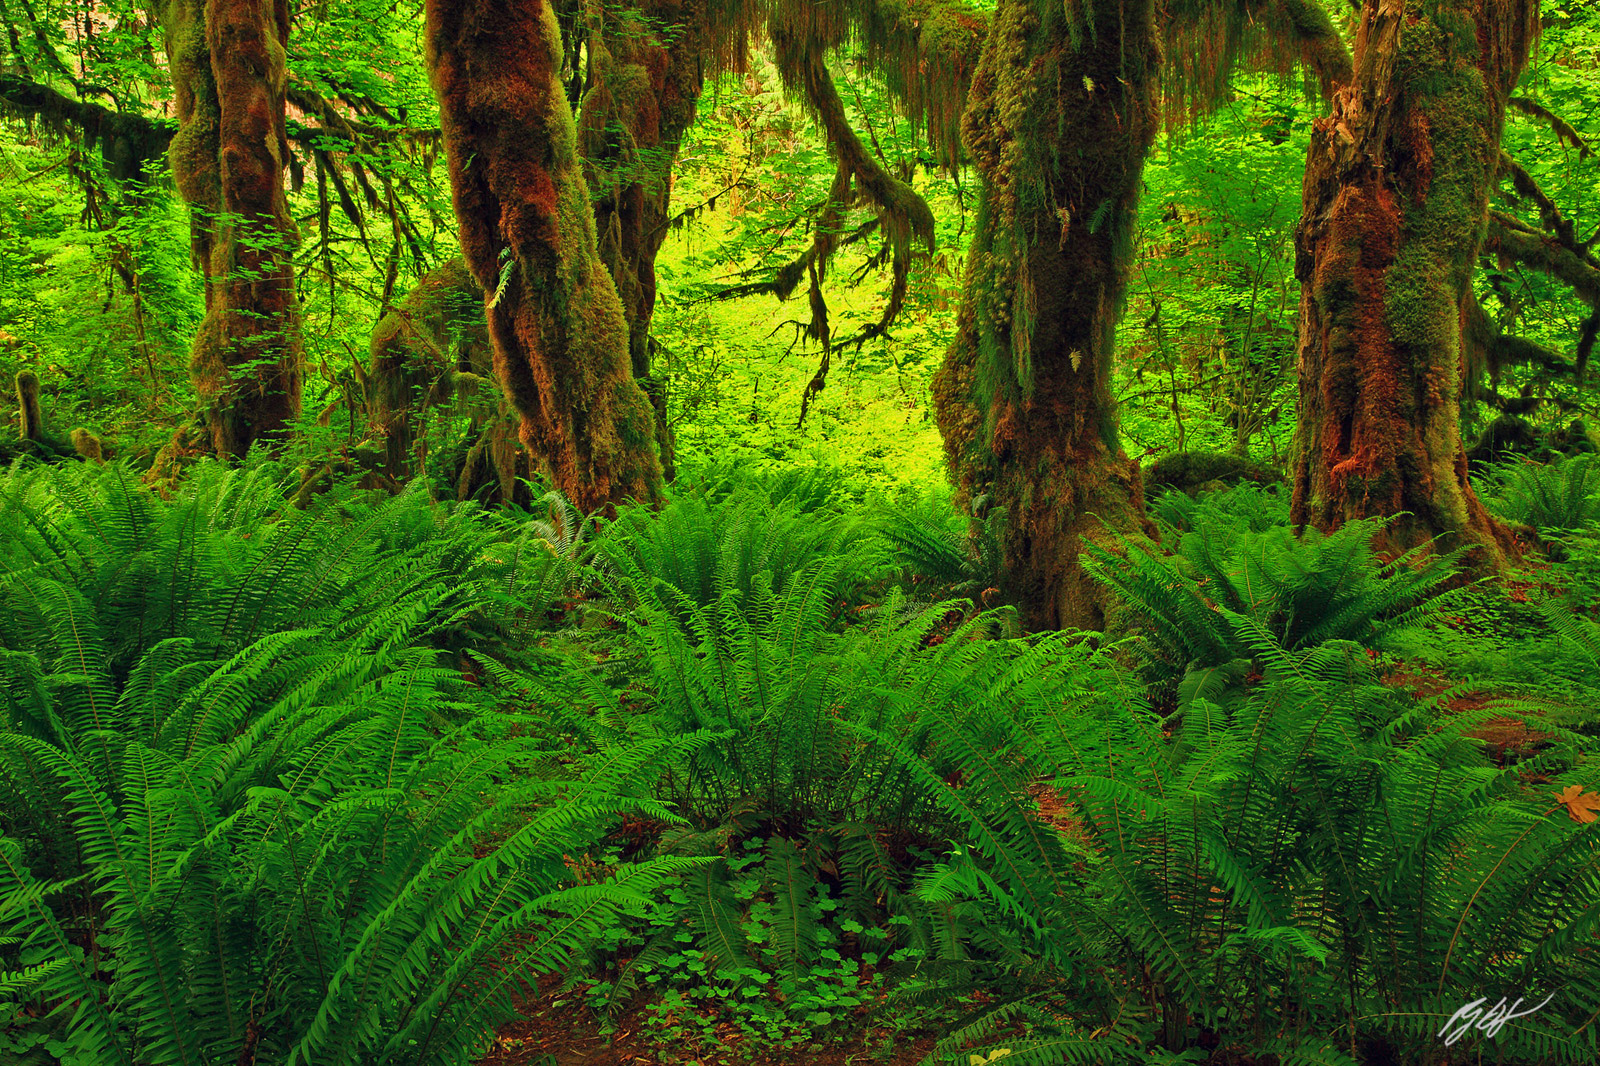 Hall of Mosses Trail in the Hoh Rainforest in Olympic National Park in Washington